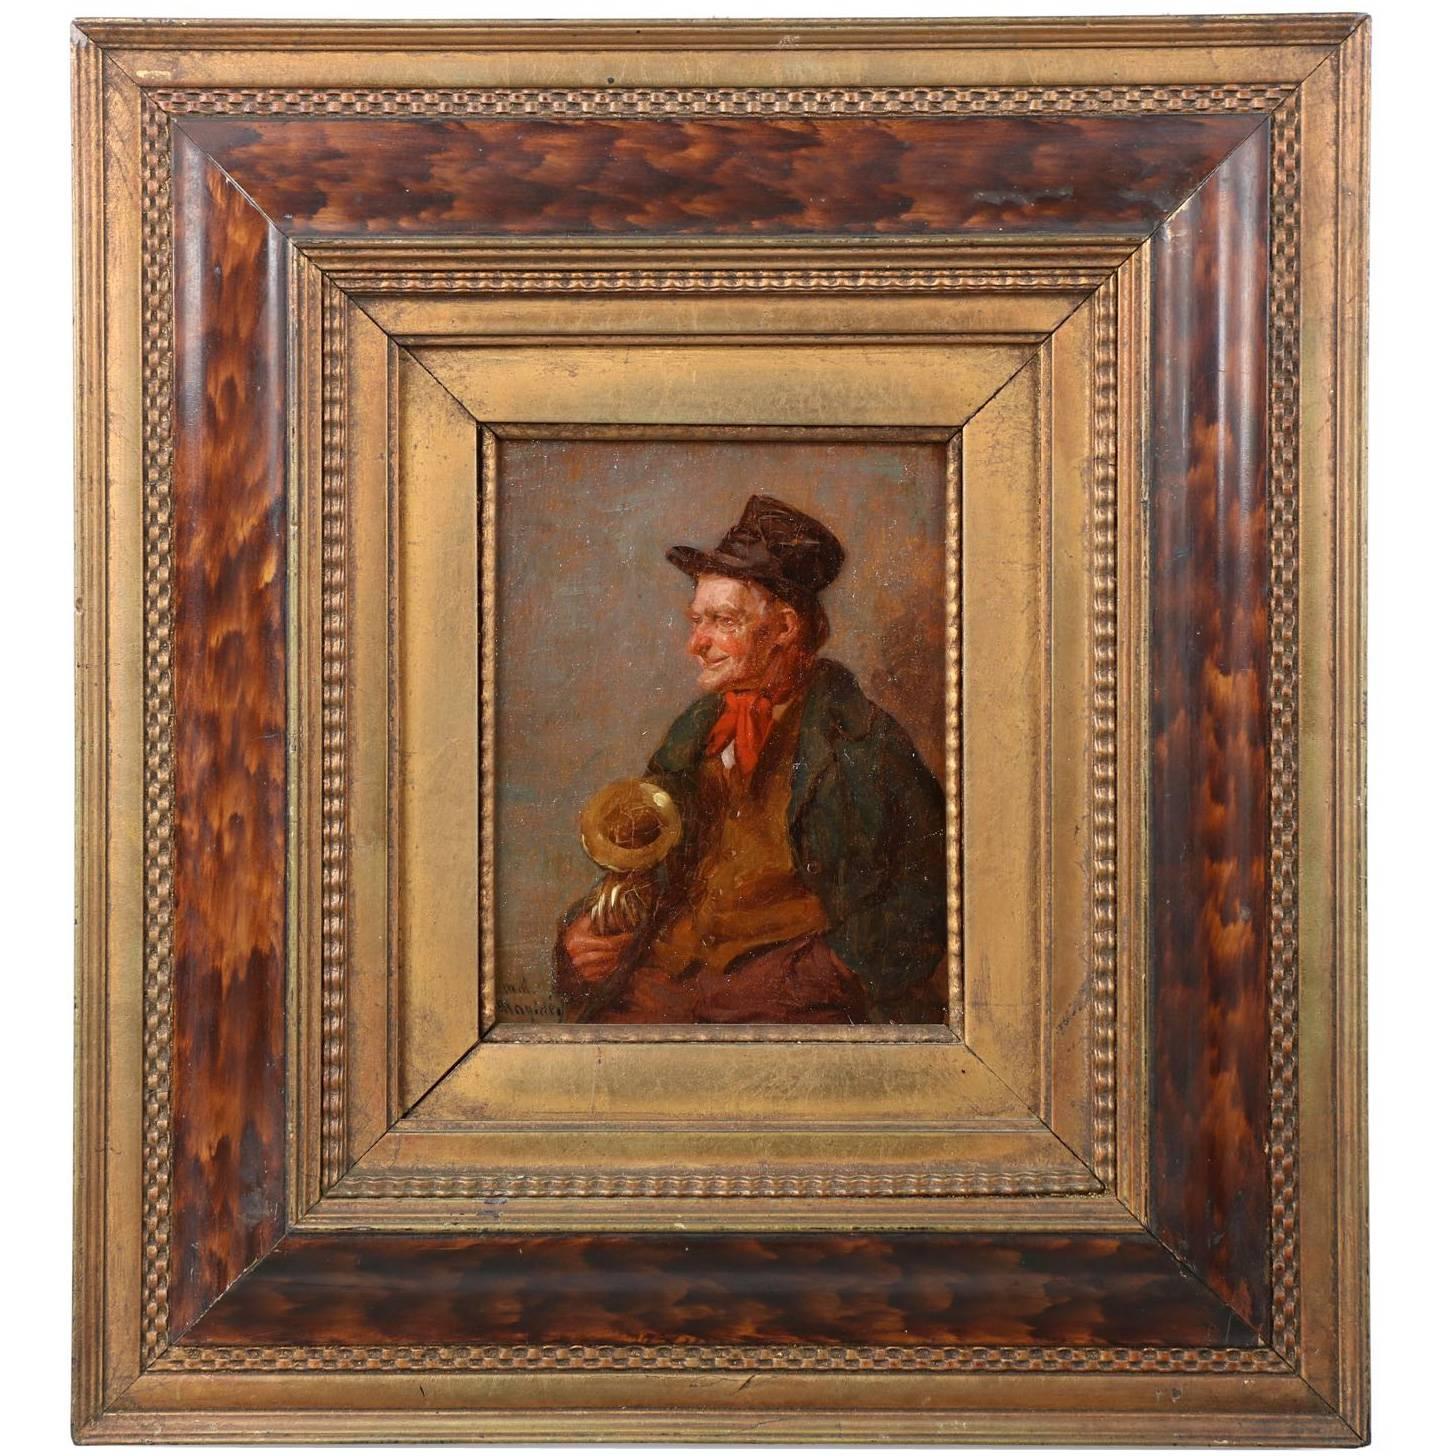 German Antique Oil Painting, "The Wandering Musician" by Wladimir Magidey